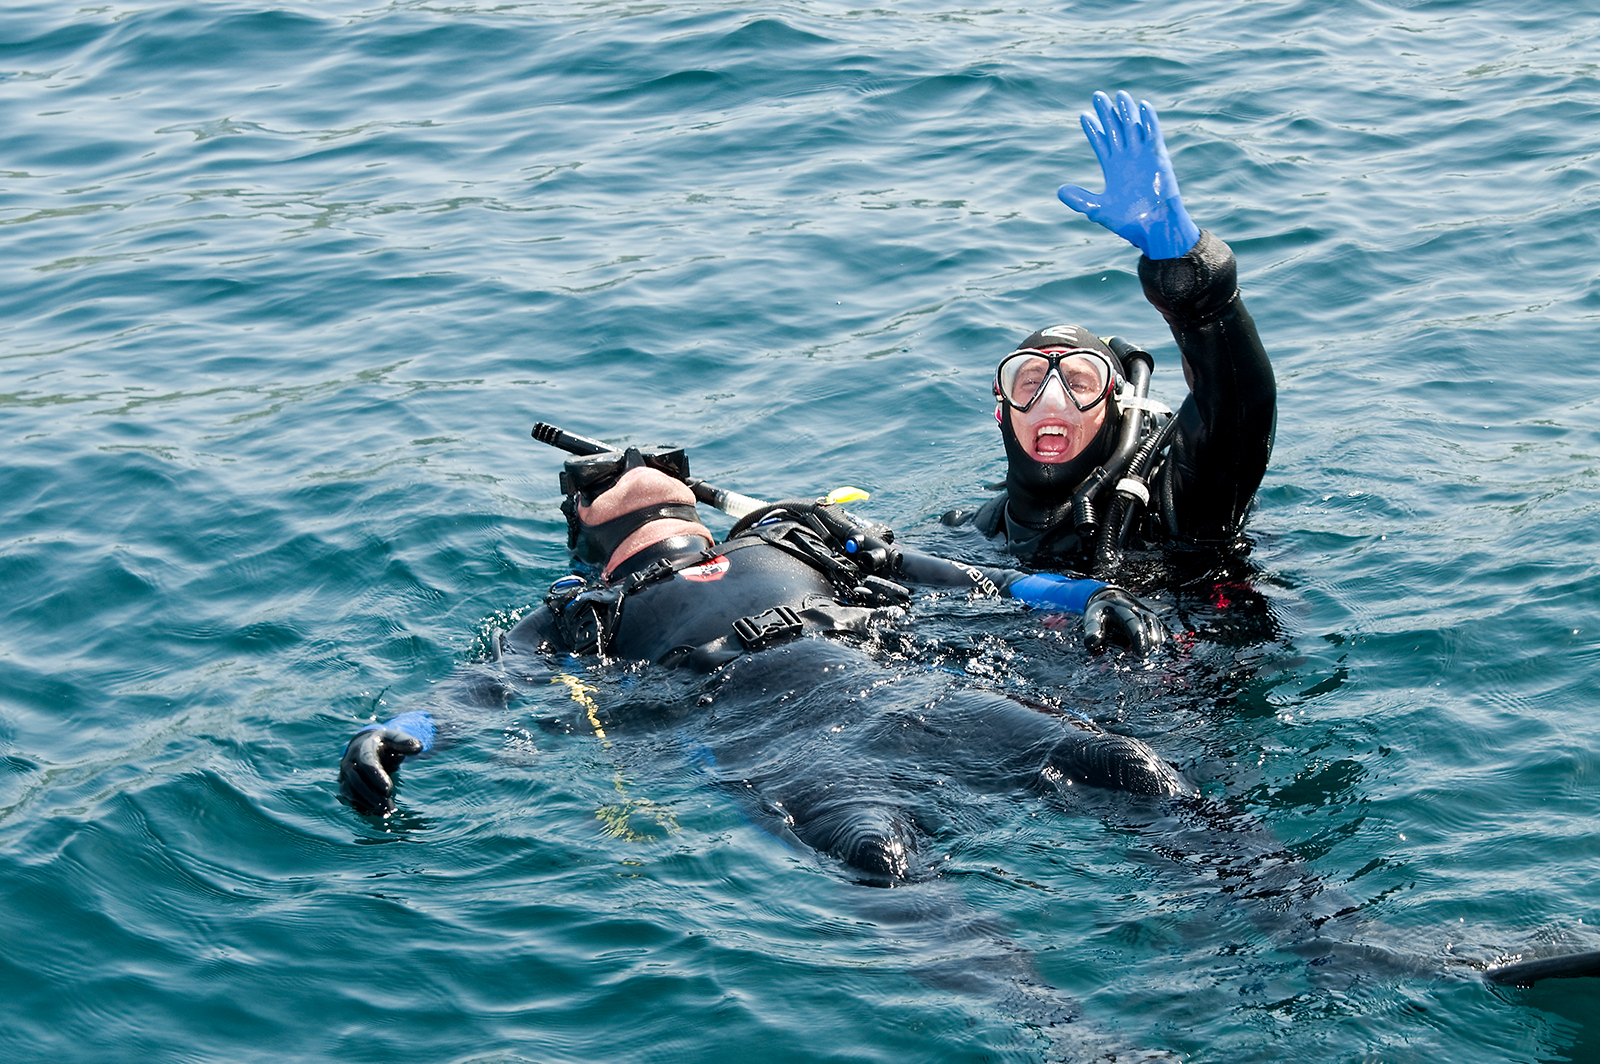 A scuba diver pretends to shout for help while towing a casualty in the water during a PADI Rescue Diver course scenario